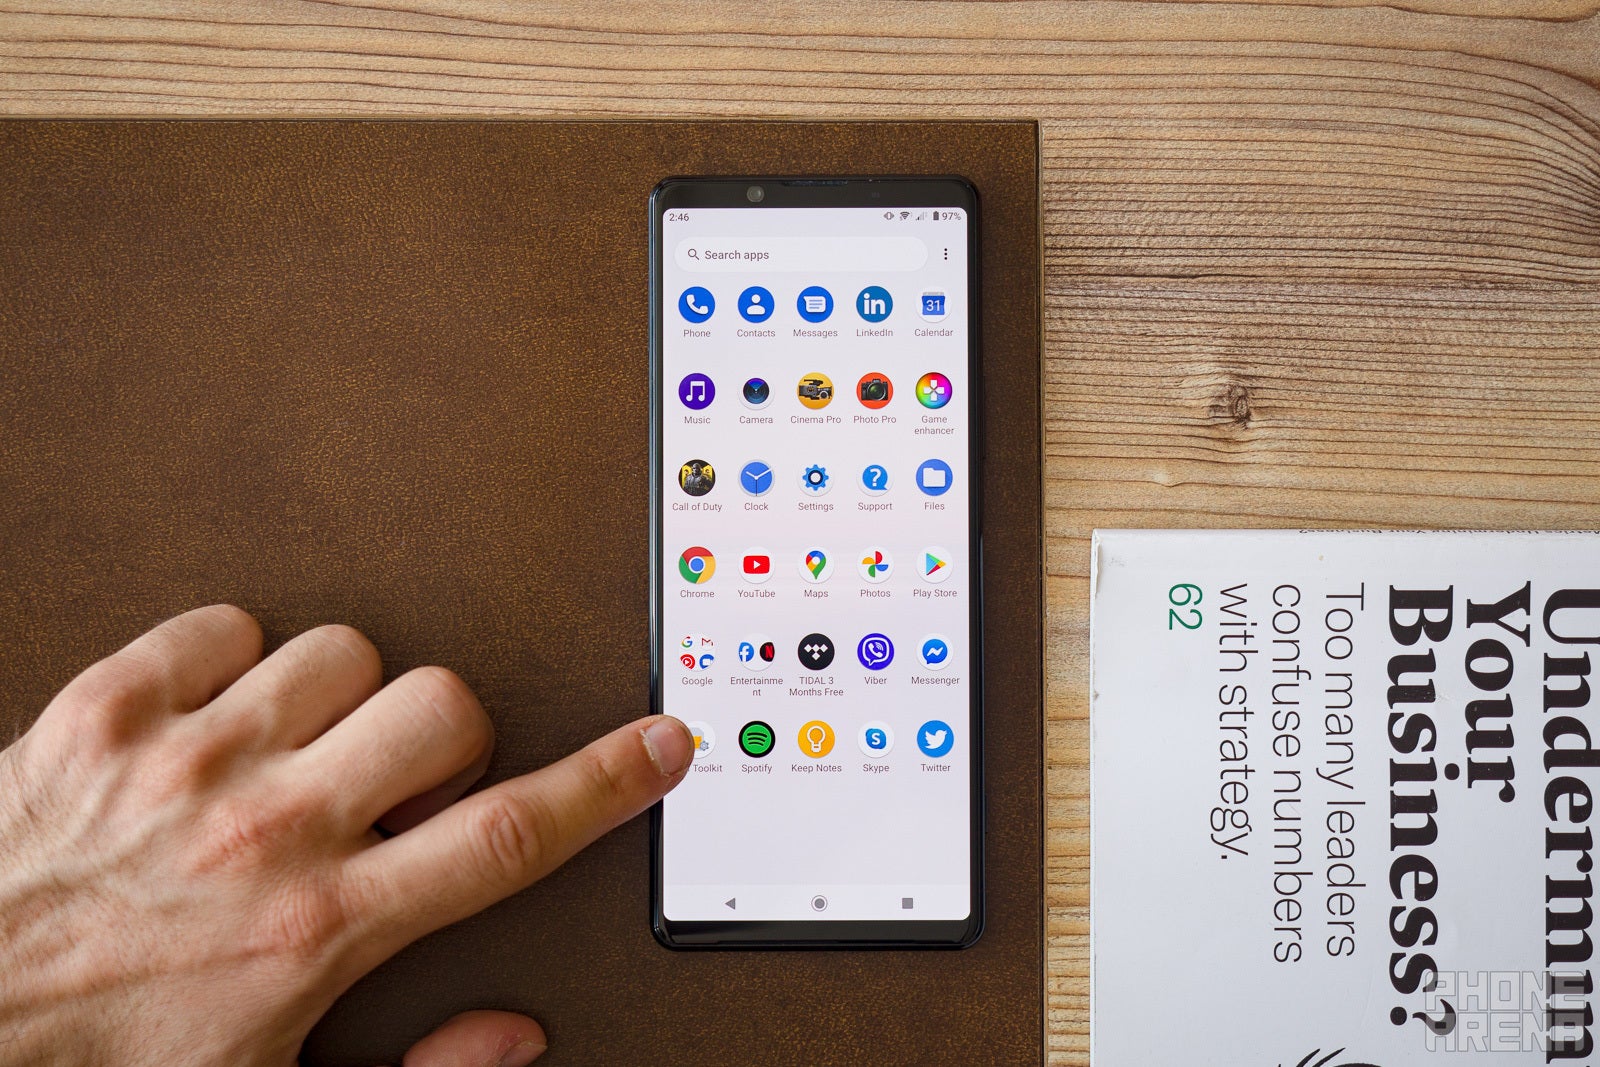 Sony Xperia 1 II Review